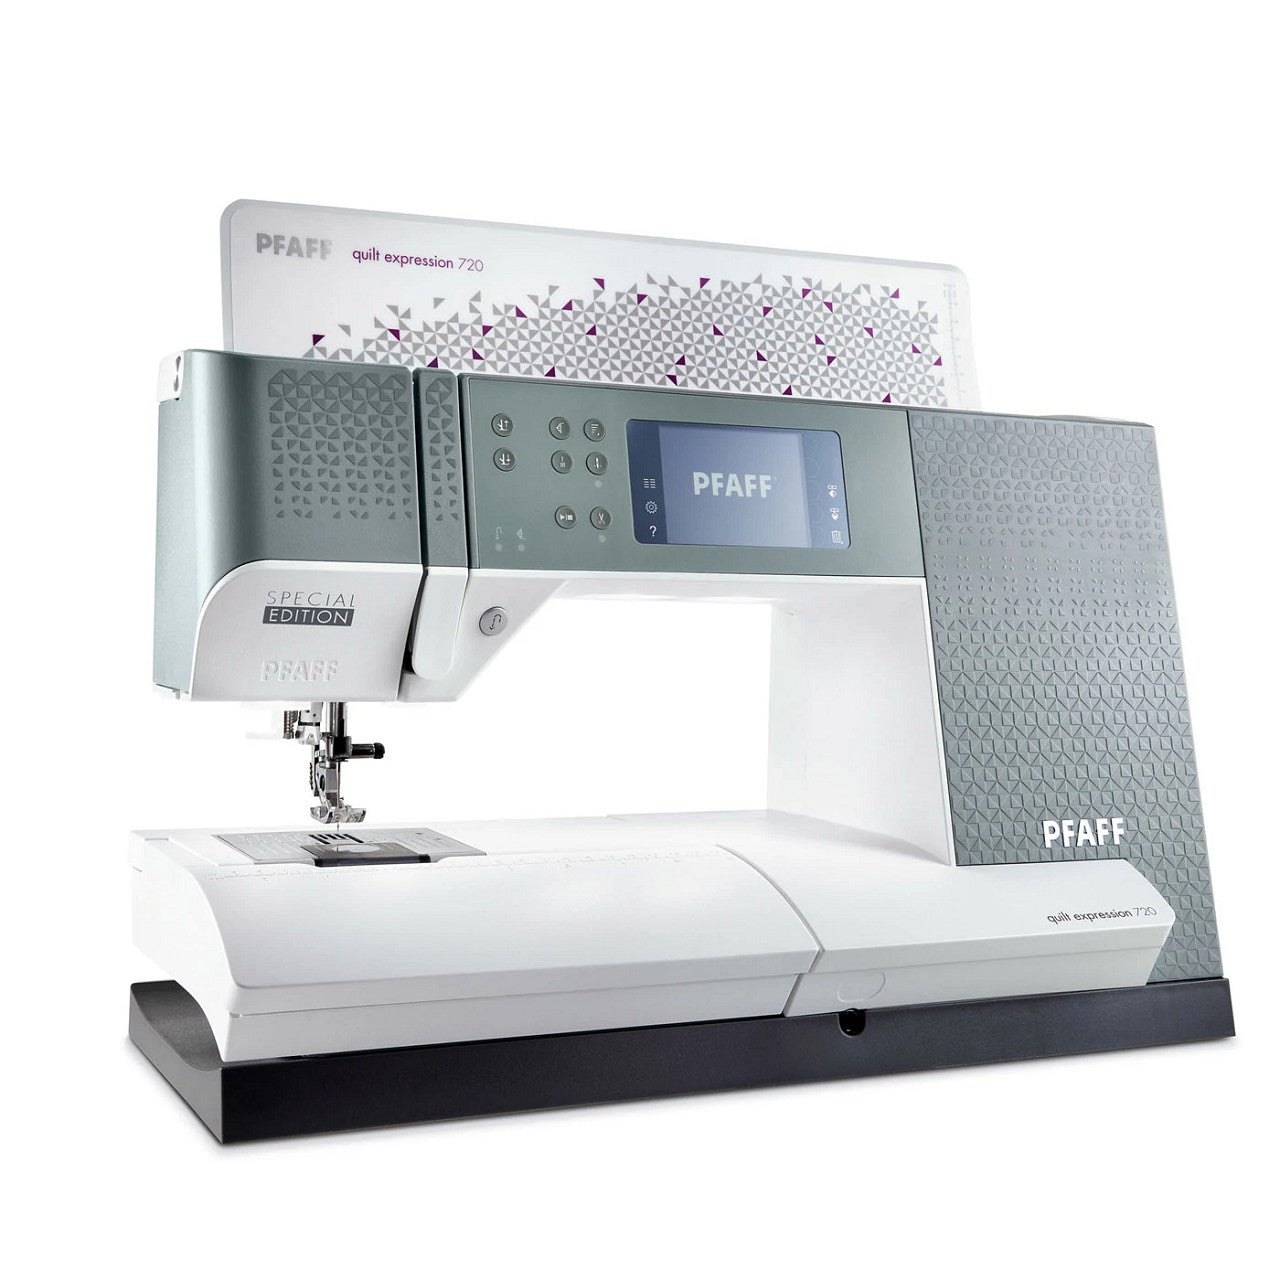 Pfaff Quilt Expression 720 Special Edition Sewing and Quilting Machine - angled view